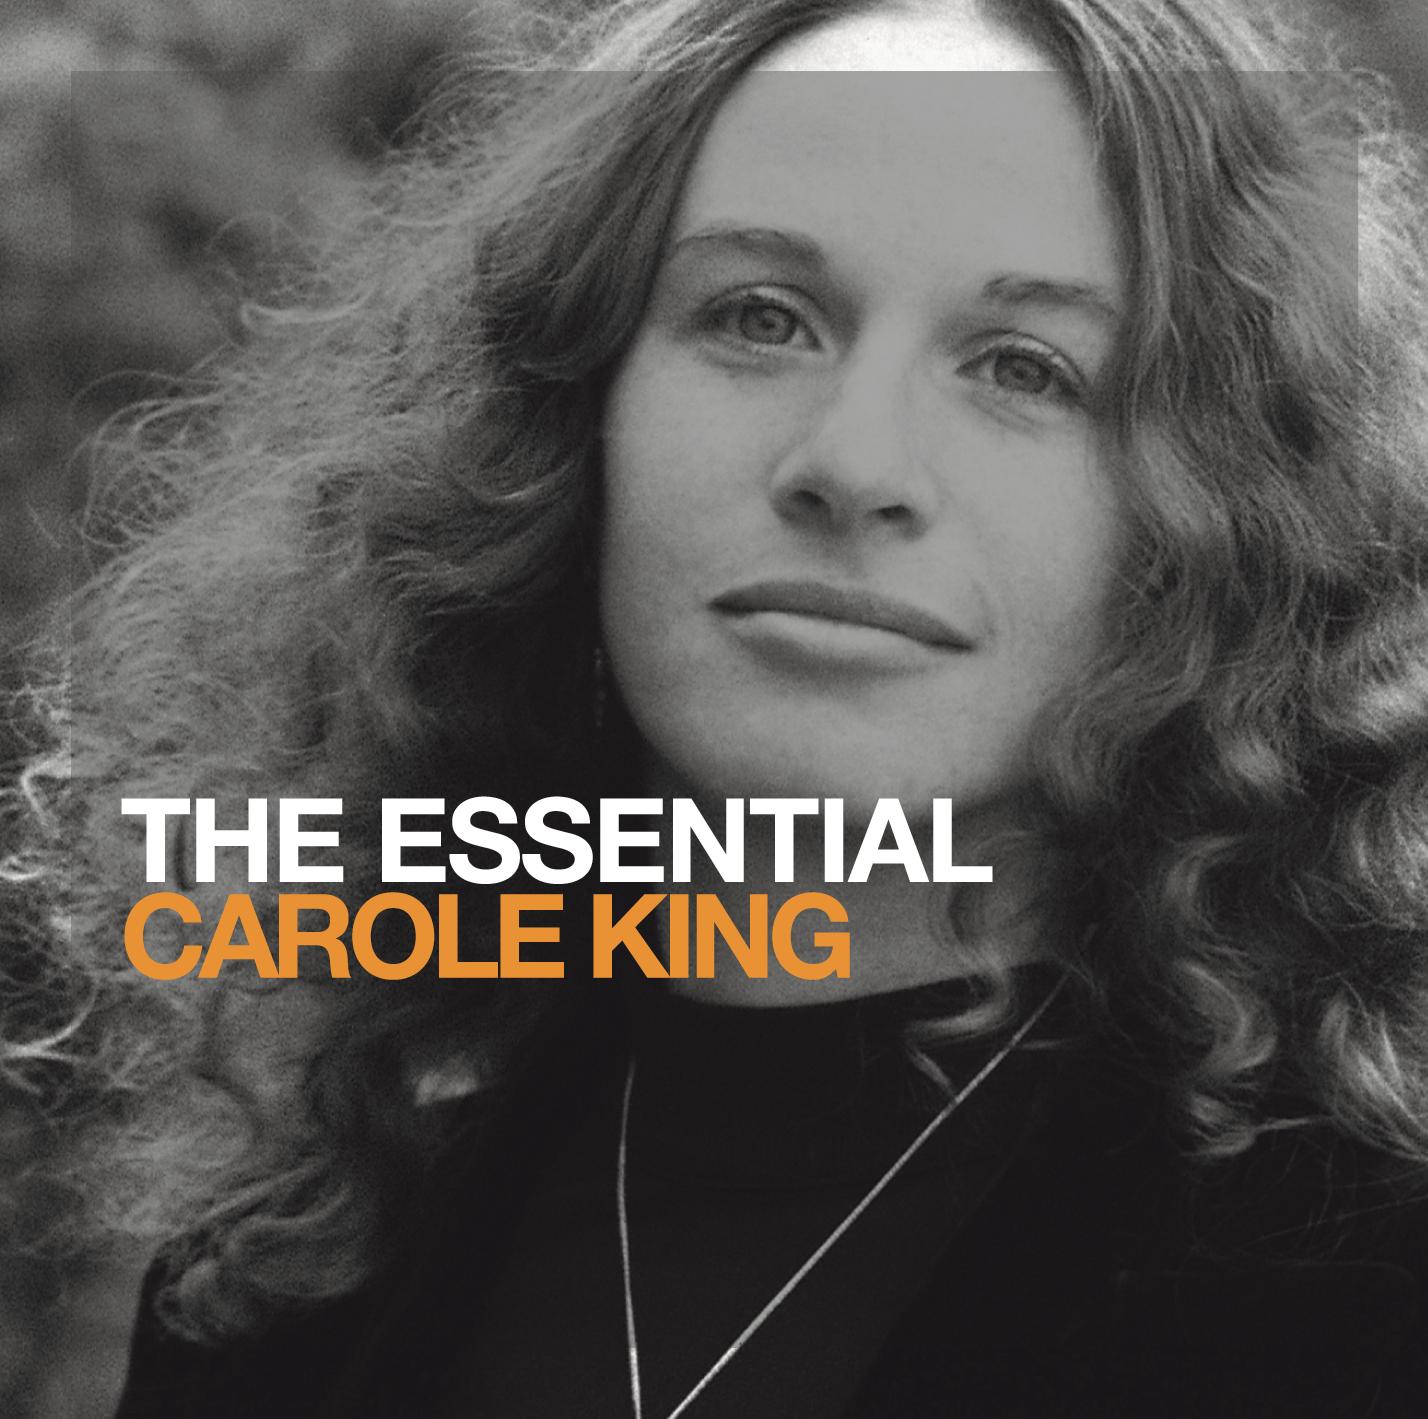 CAROLE KING "The Essential"